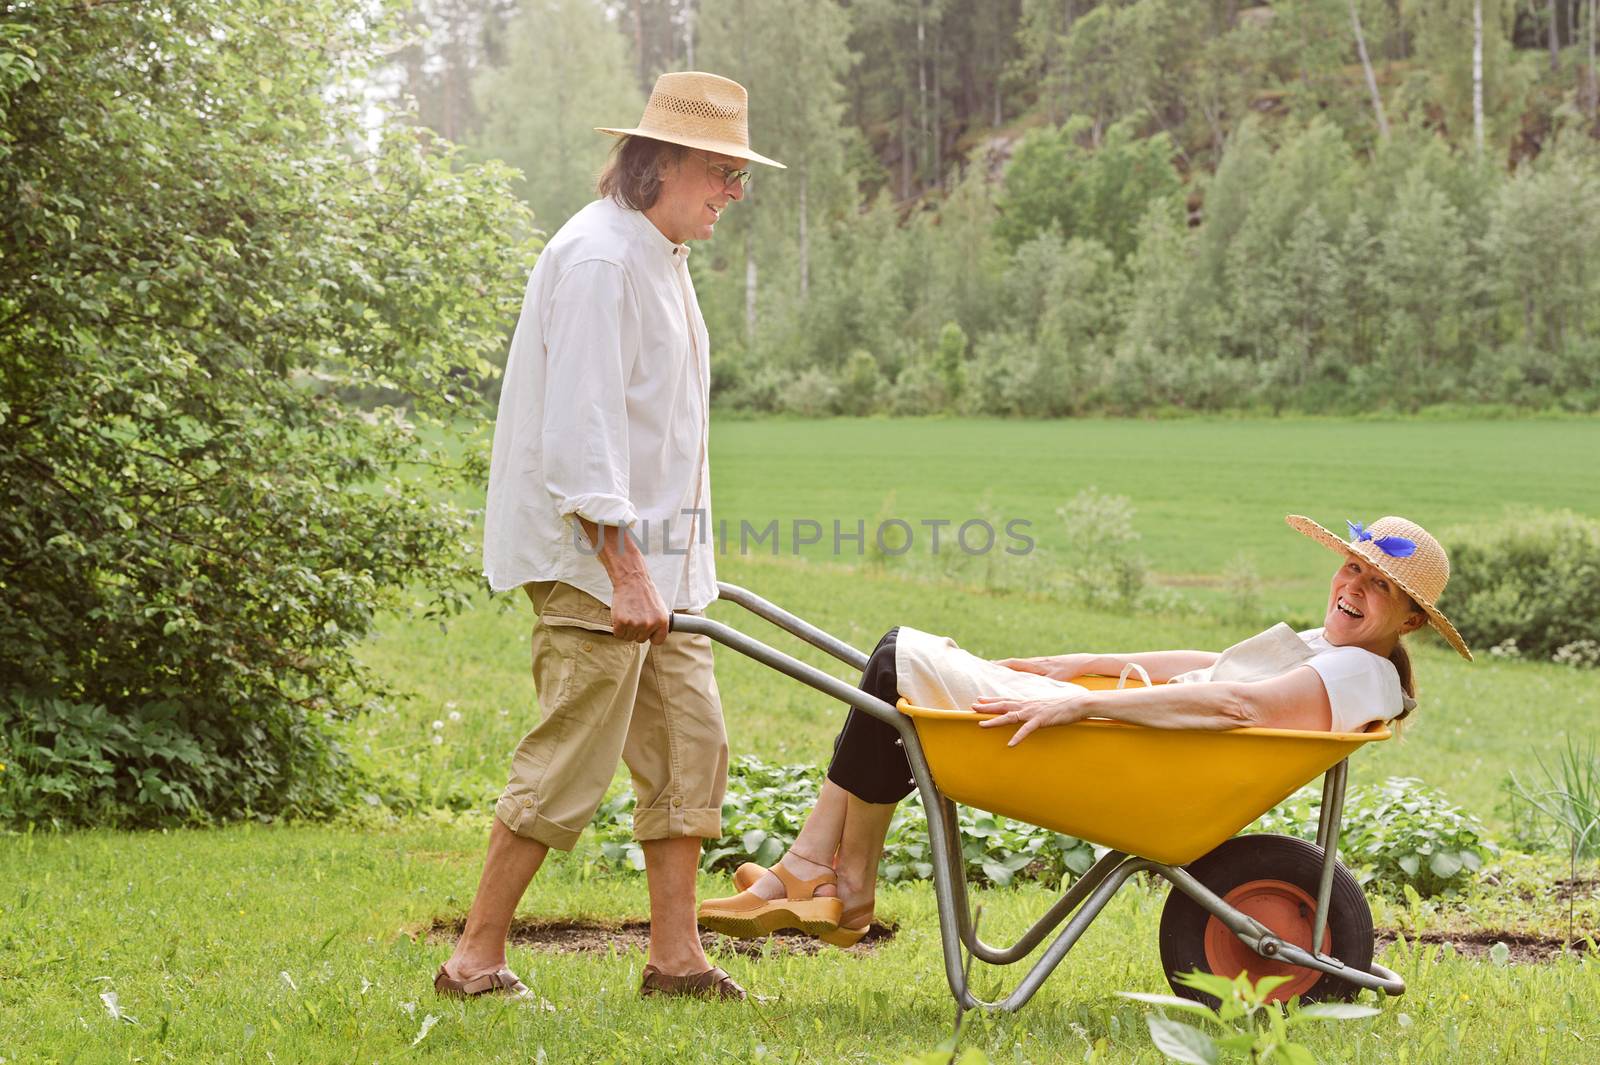 Senior man carries a senior woman in a wheelbarrow outdoors near a vegetable patch. They're laughing and having fun. Digital filtering used